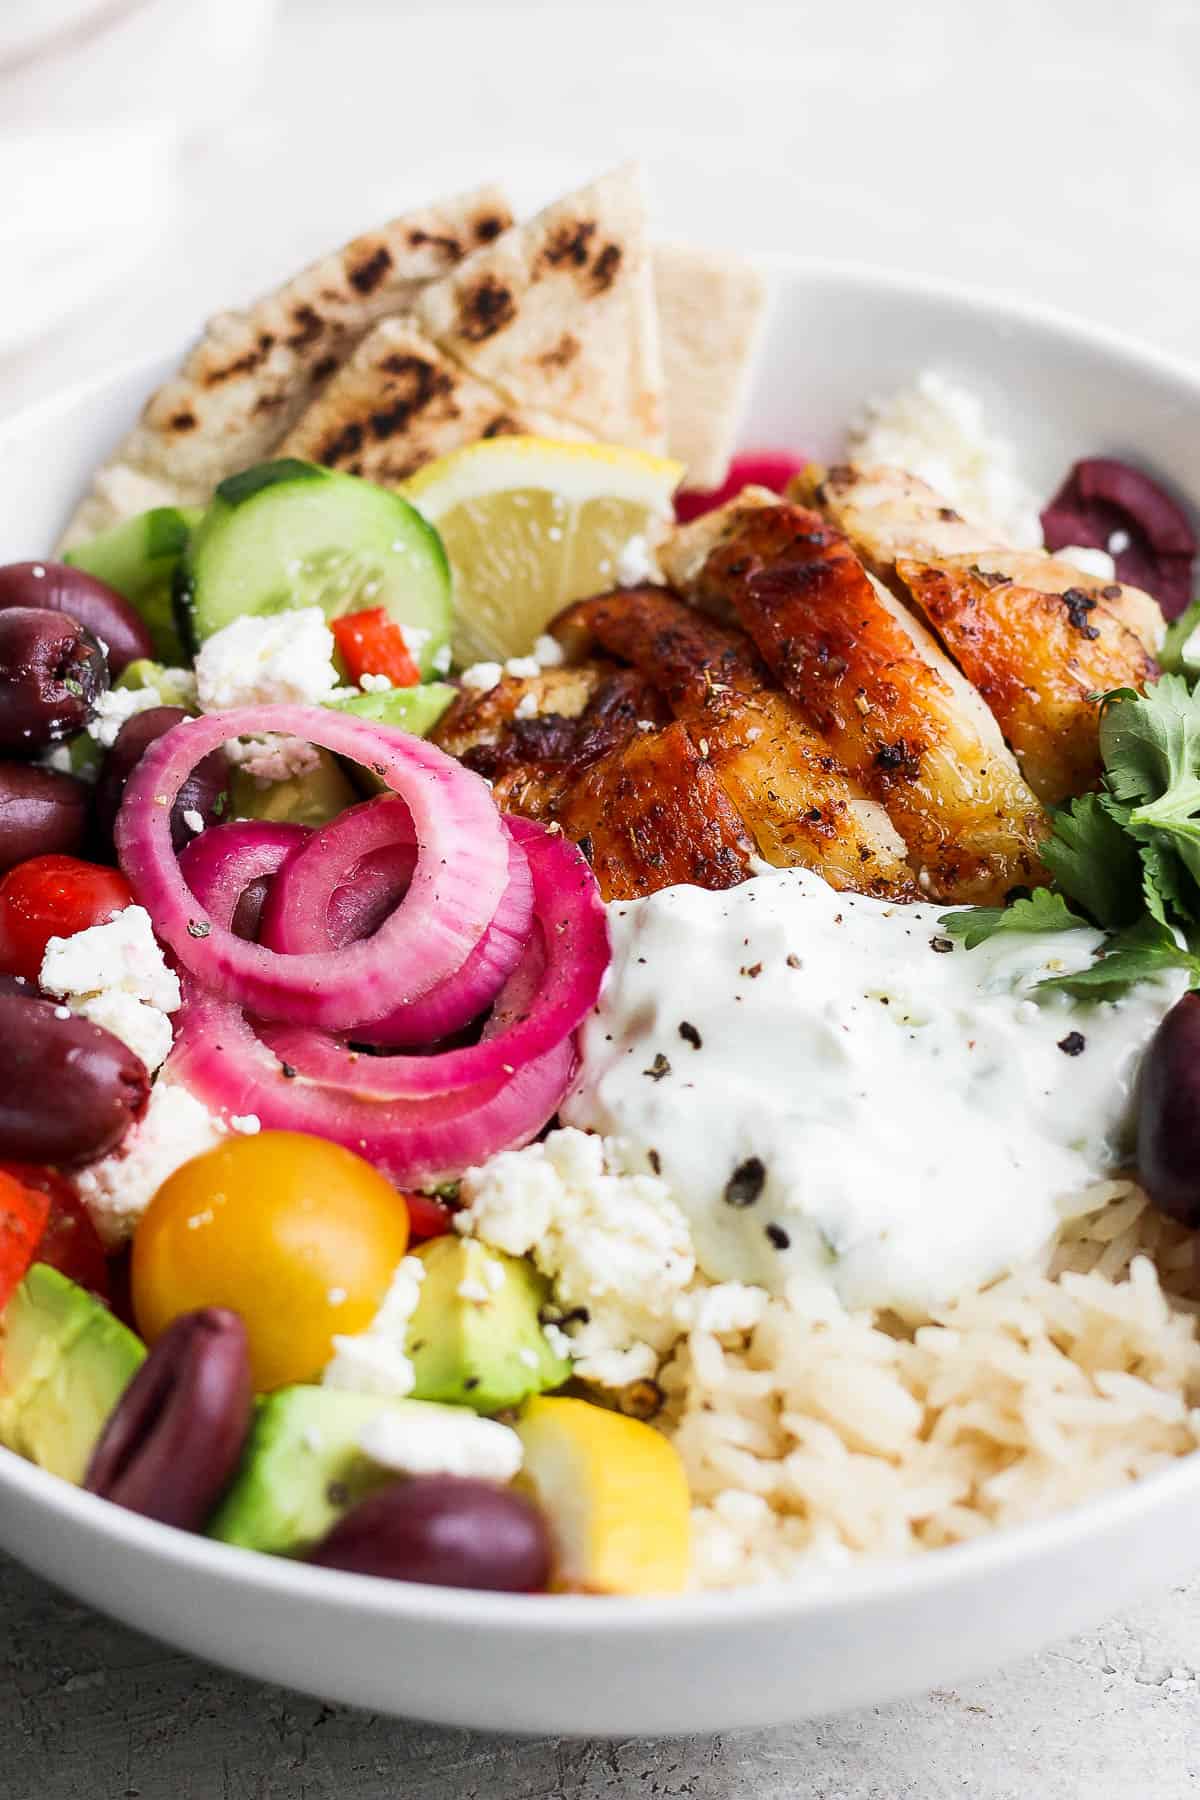 Another view of the Greek chicken bowl that has all the toppings.